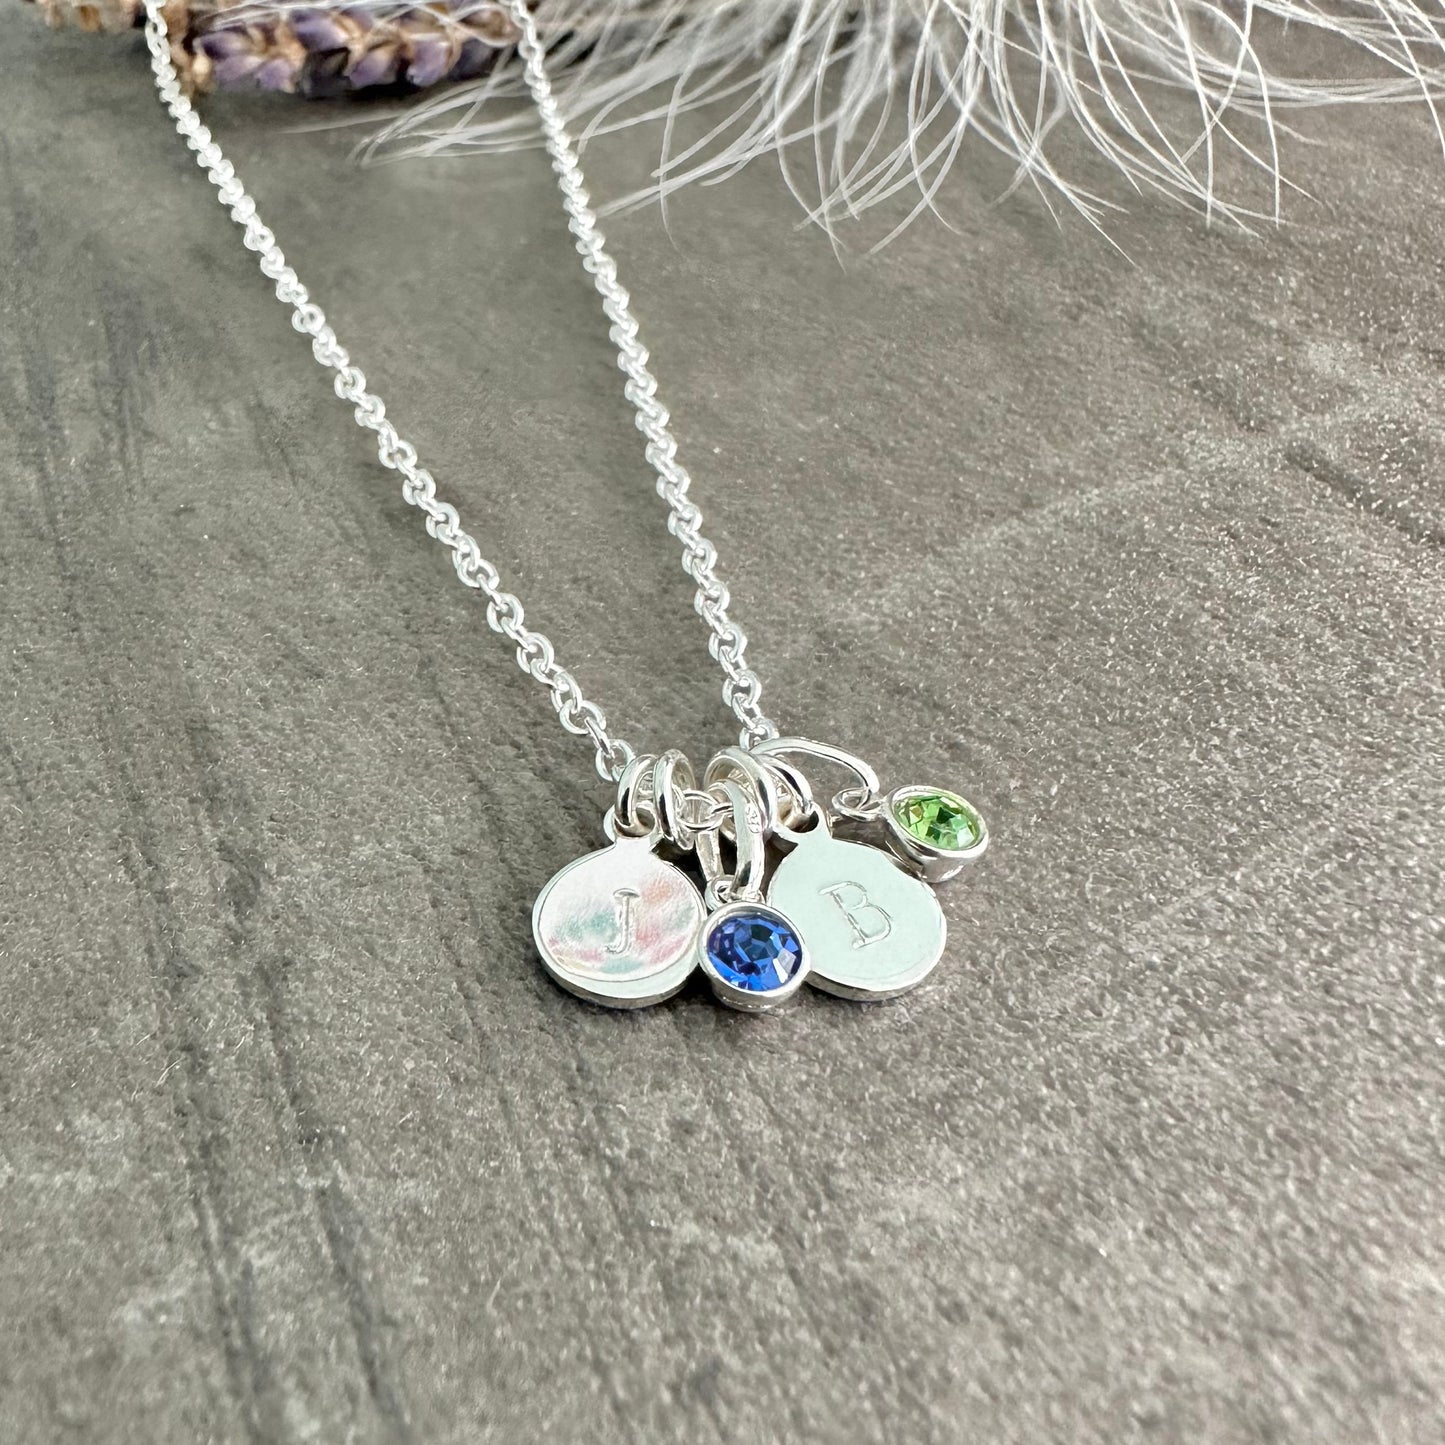 Initials Necklace with Crystal Birthstone Charms, Sentimental Gift for Mum